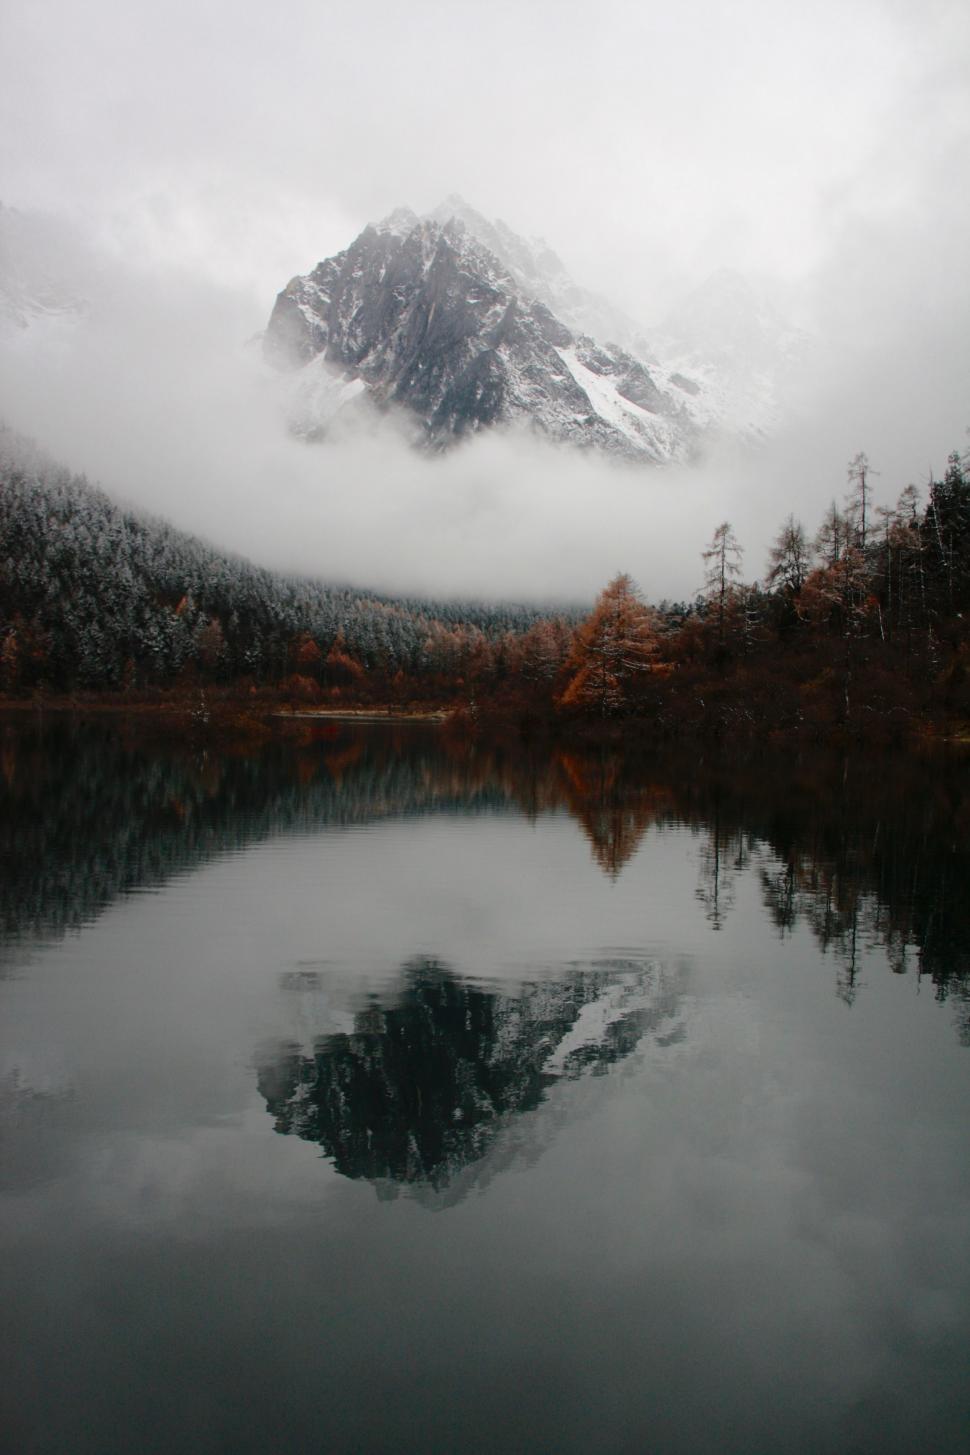 Free Image of Snow-Covered Mountain by Lake 